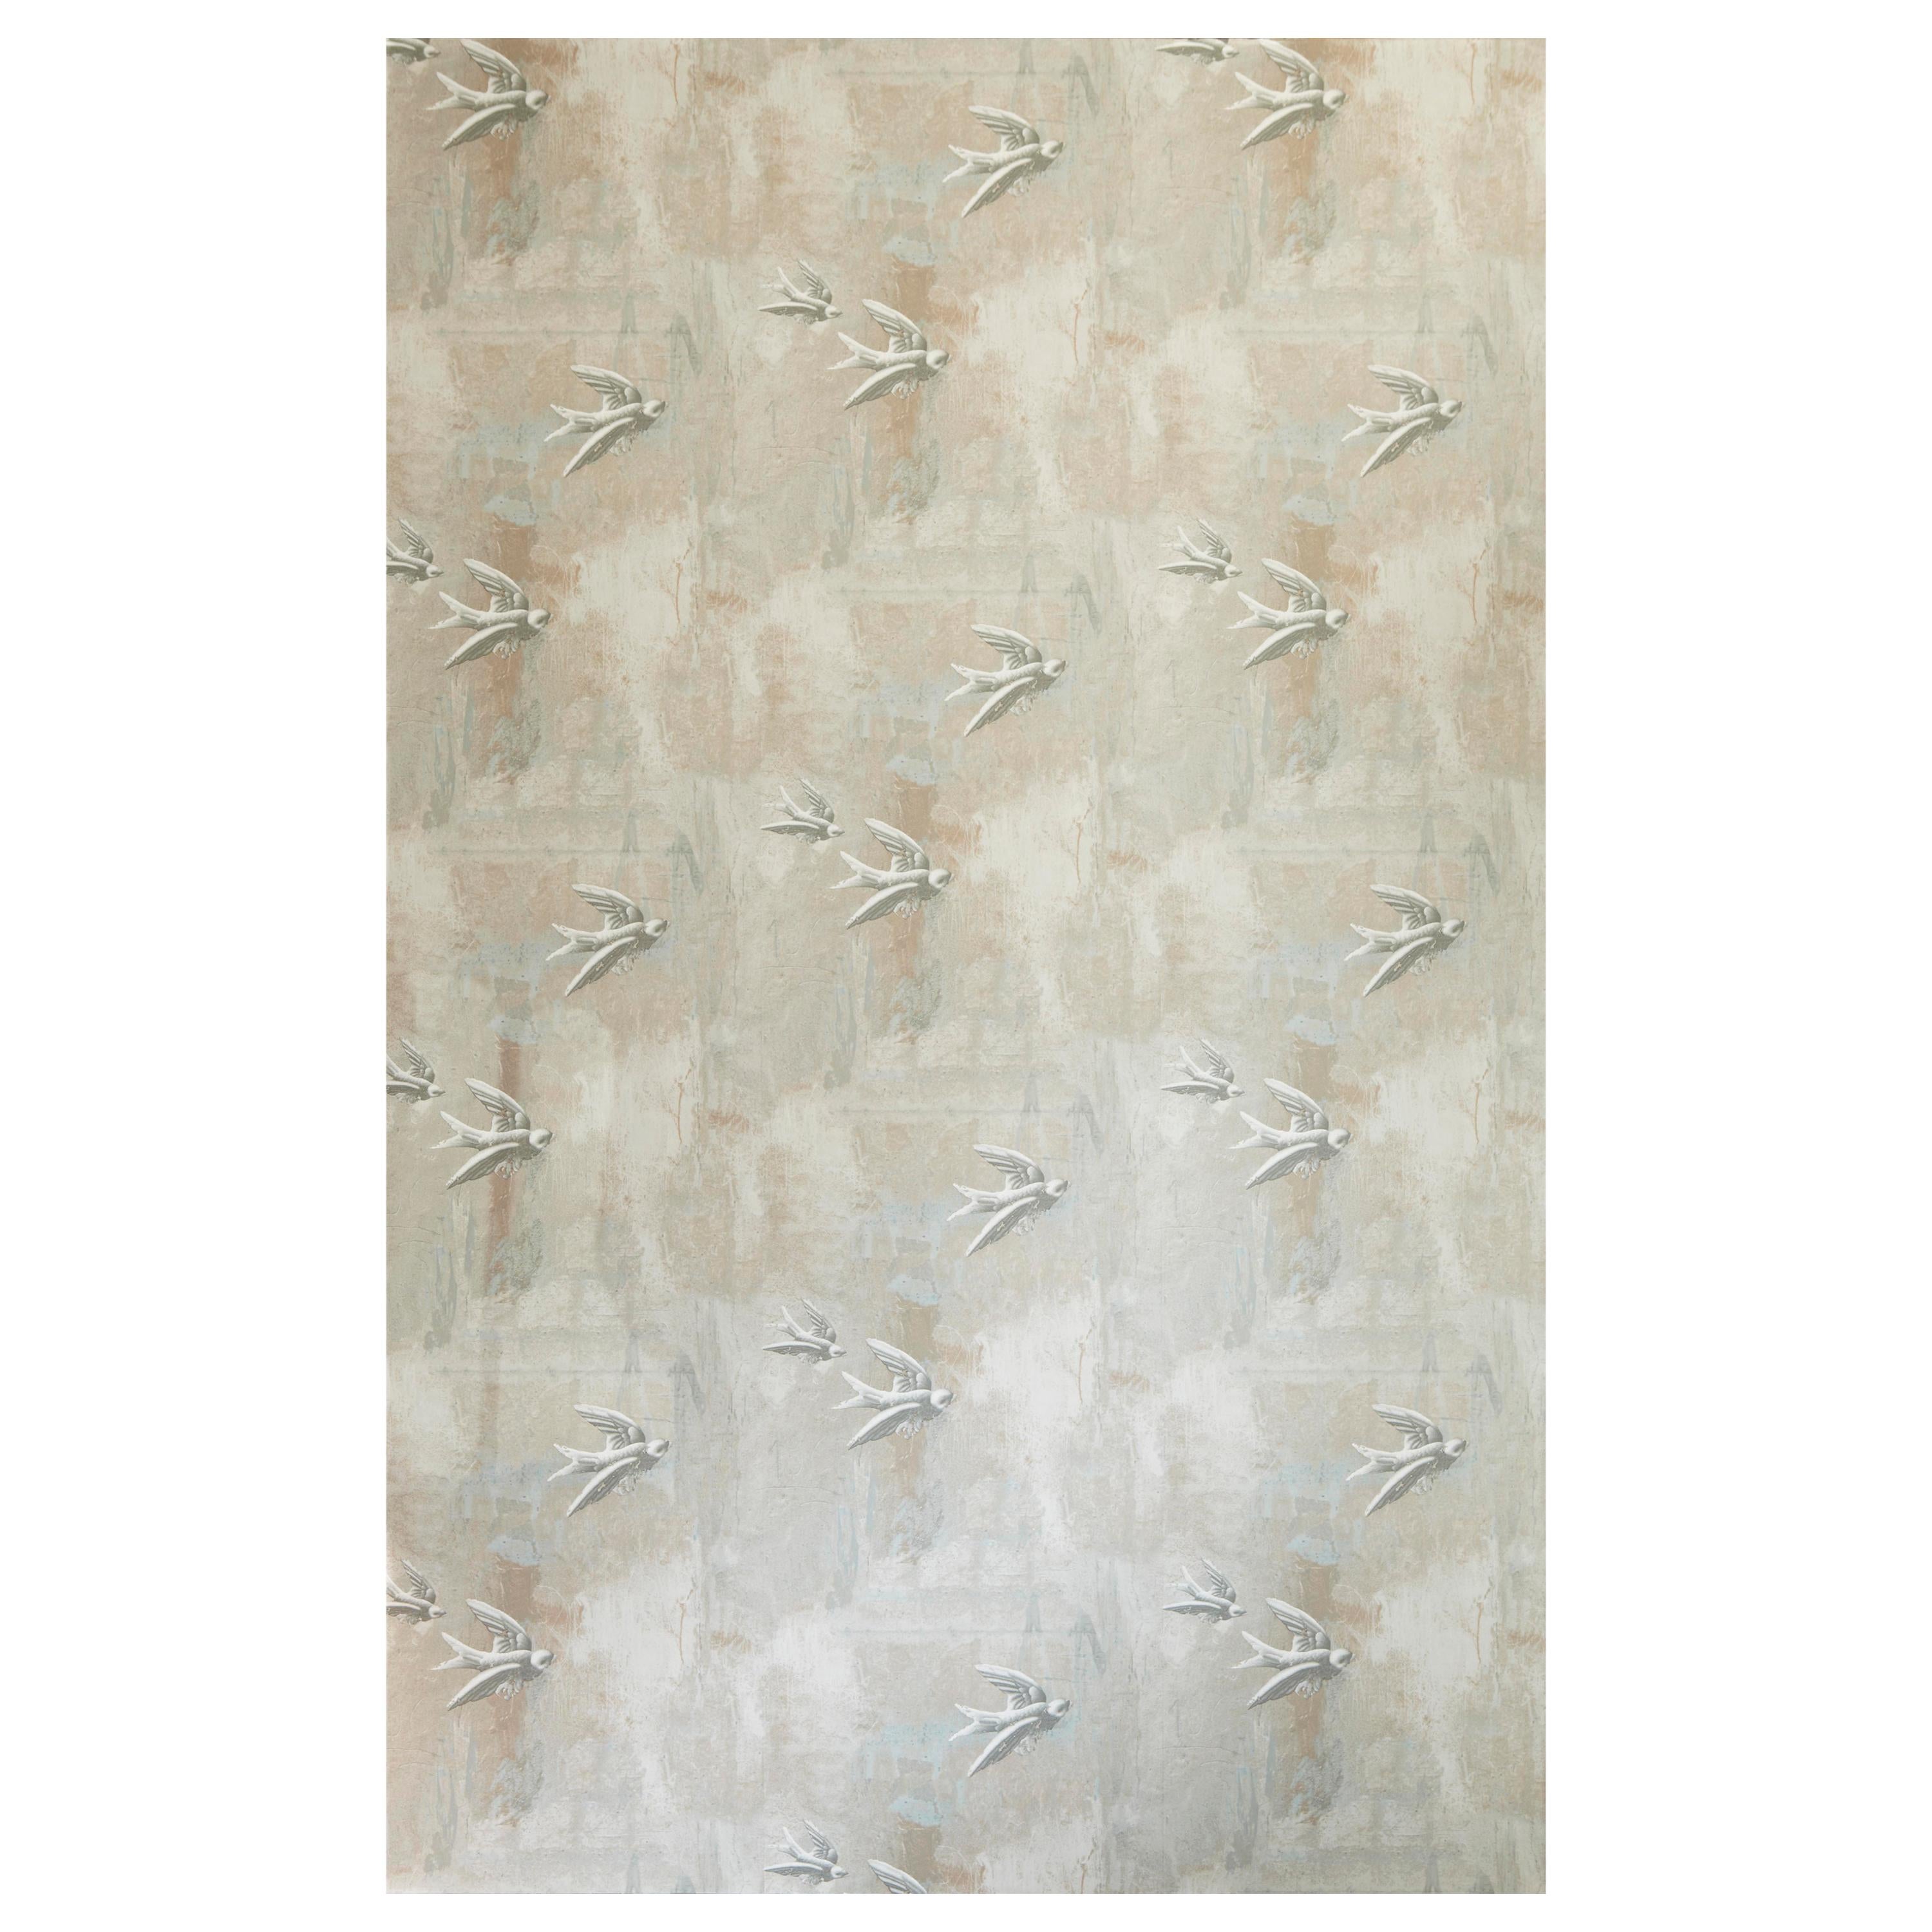 'Fresco Birds' Contemporary, Traditional Wallpaper in Natural im Angebot